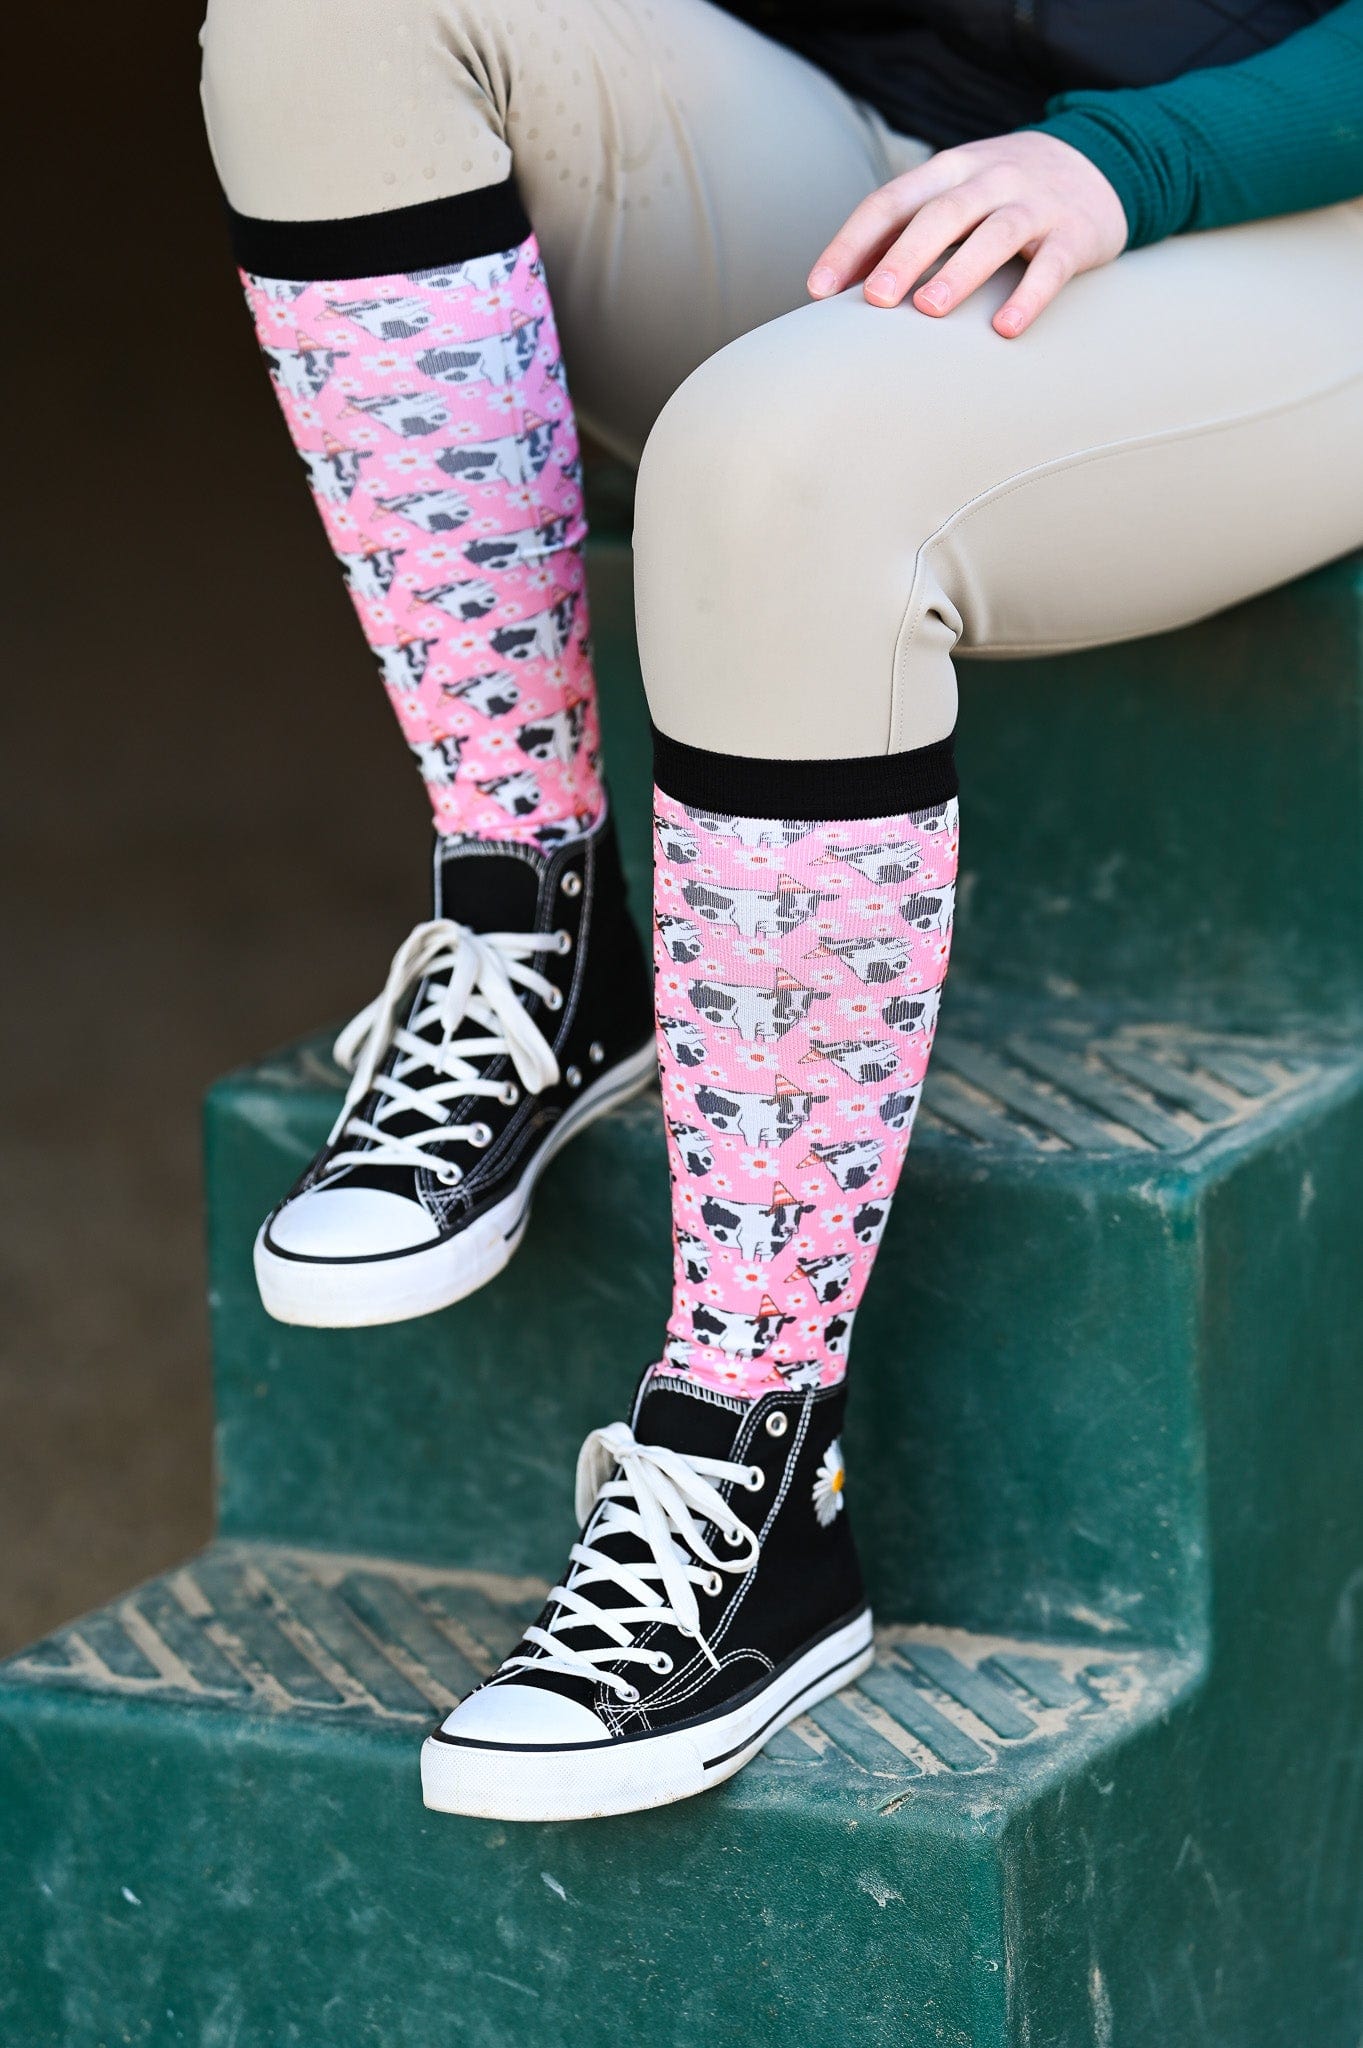 dreamers & schemers Boot Sock Dreamers & Schemers- Udder Chaos equestrian team apparel online tack store mobile tack store custom farm apparel custom show stable clothing equestrian lifestyle horse show clothing riding clothes horses equestrian tack store